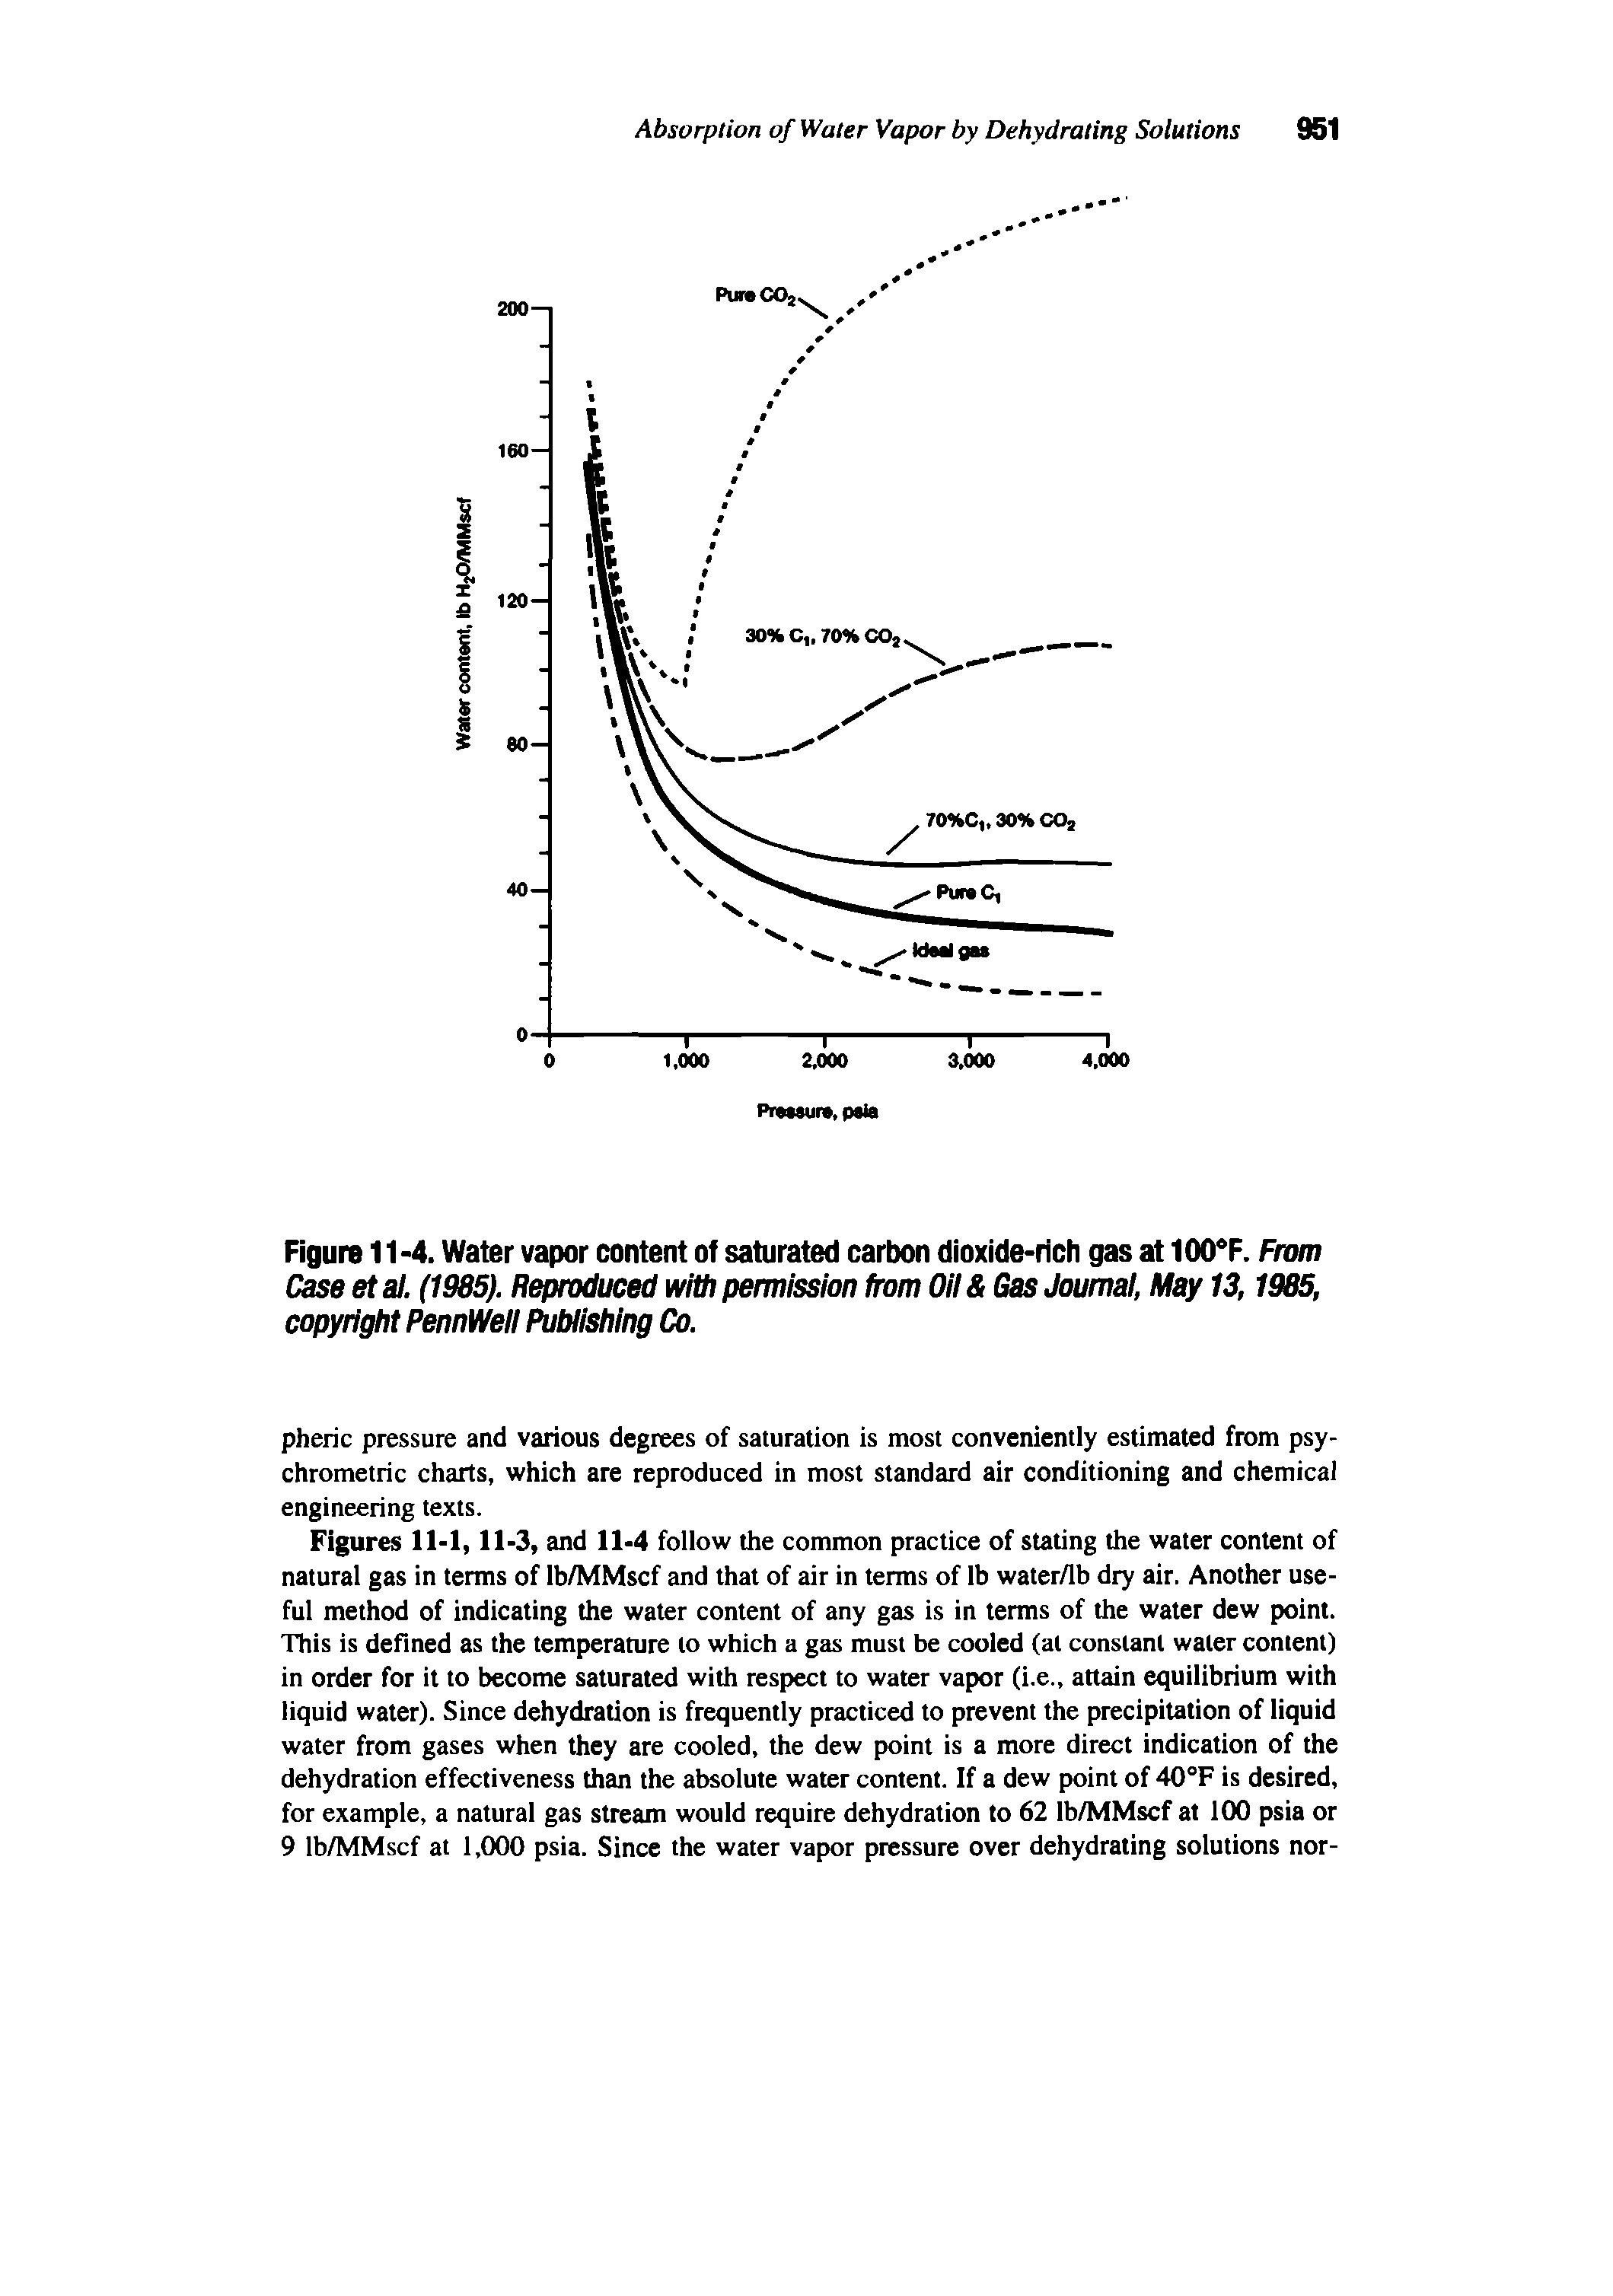 Figure 11 -4. Water vapor content of saturated carbon dioxide-rich gas at lOO F. Ram Case etal. (1985). Reproduced with permission from Oii Gas Joumai, May 13,1985, copyright PennWeii Publishing Co.